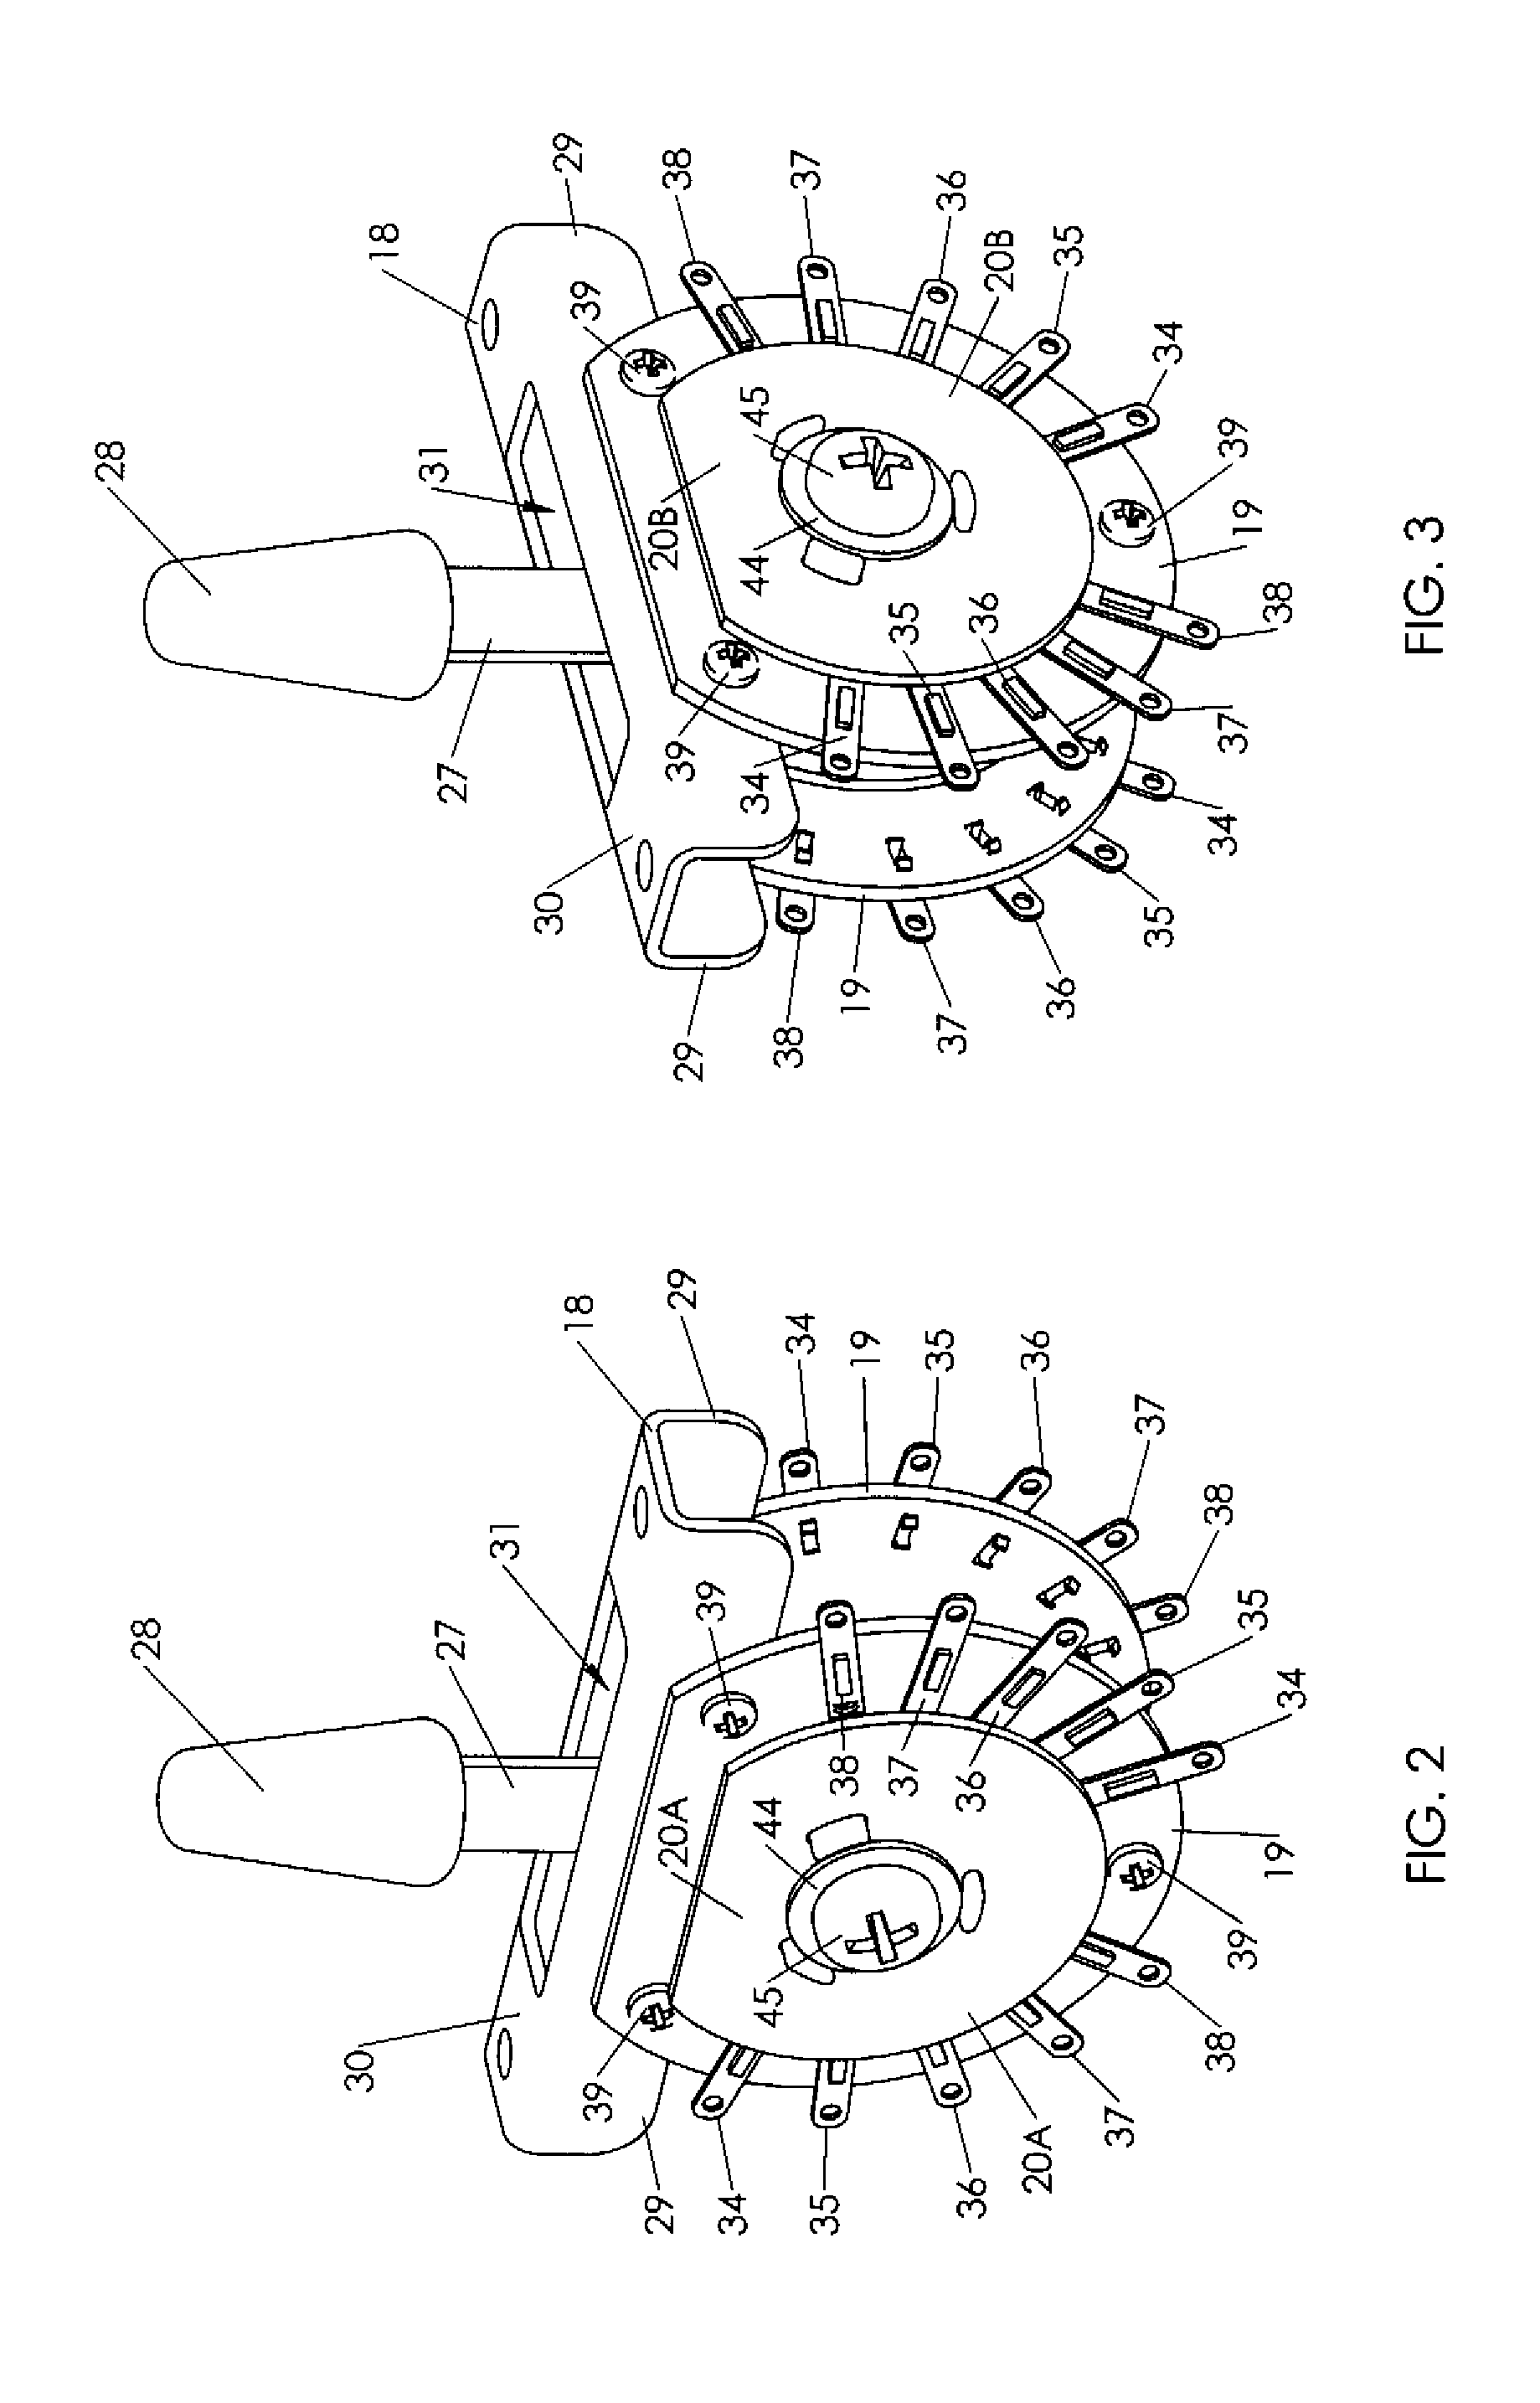 Advanced Pickup Selector Switch Assembly